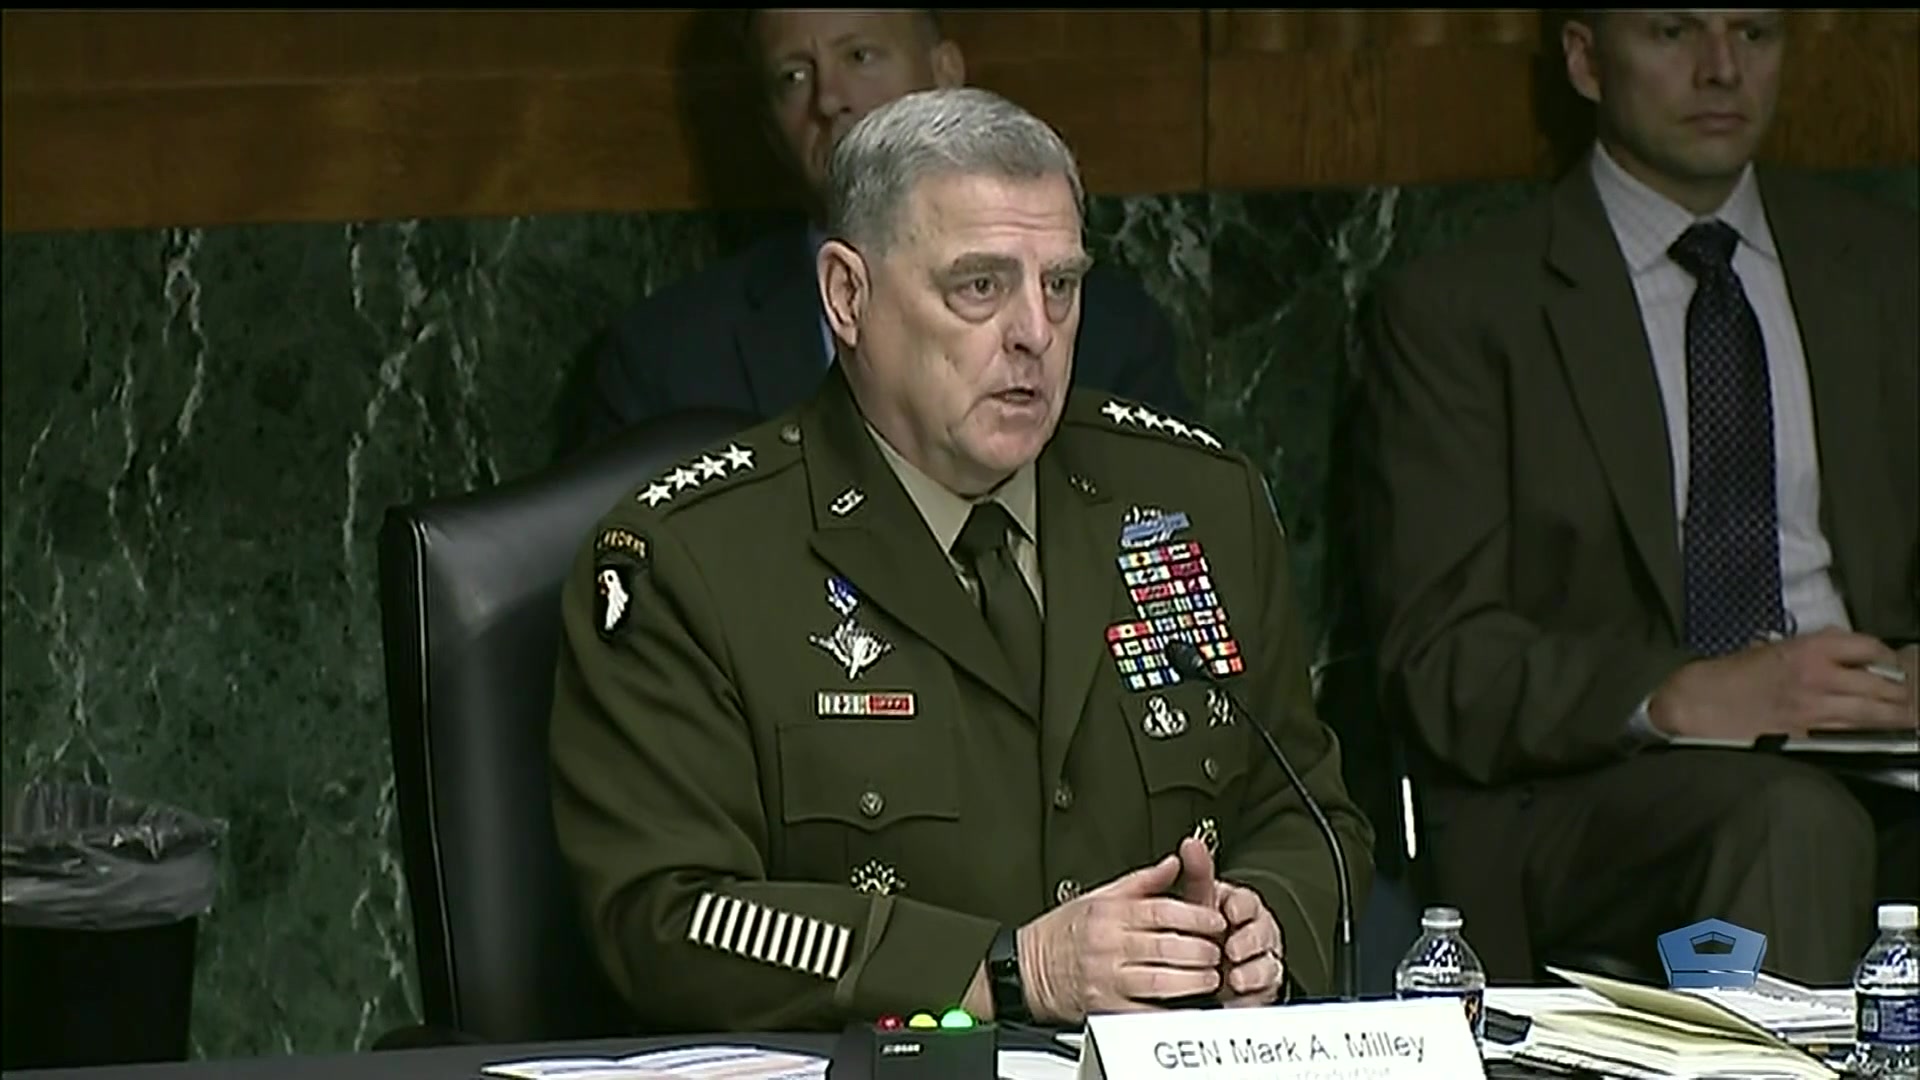 Army Gen. Mark A. Milley speaks at a table.